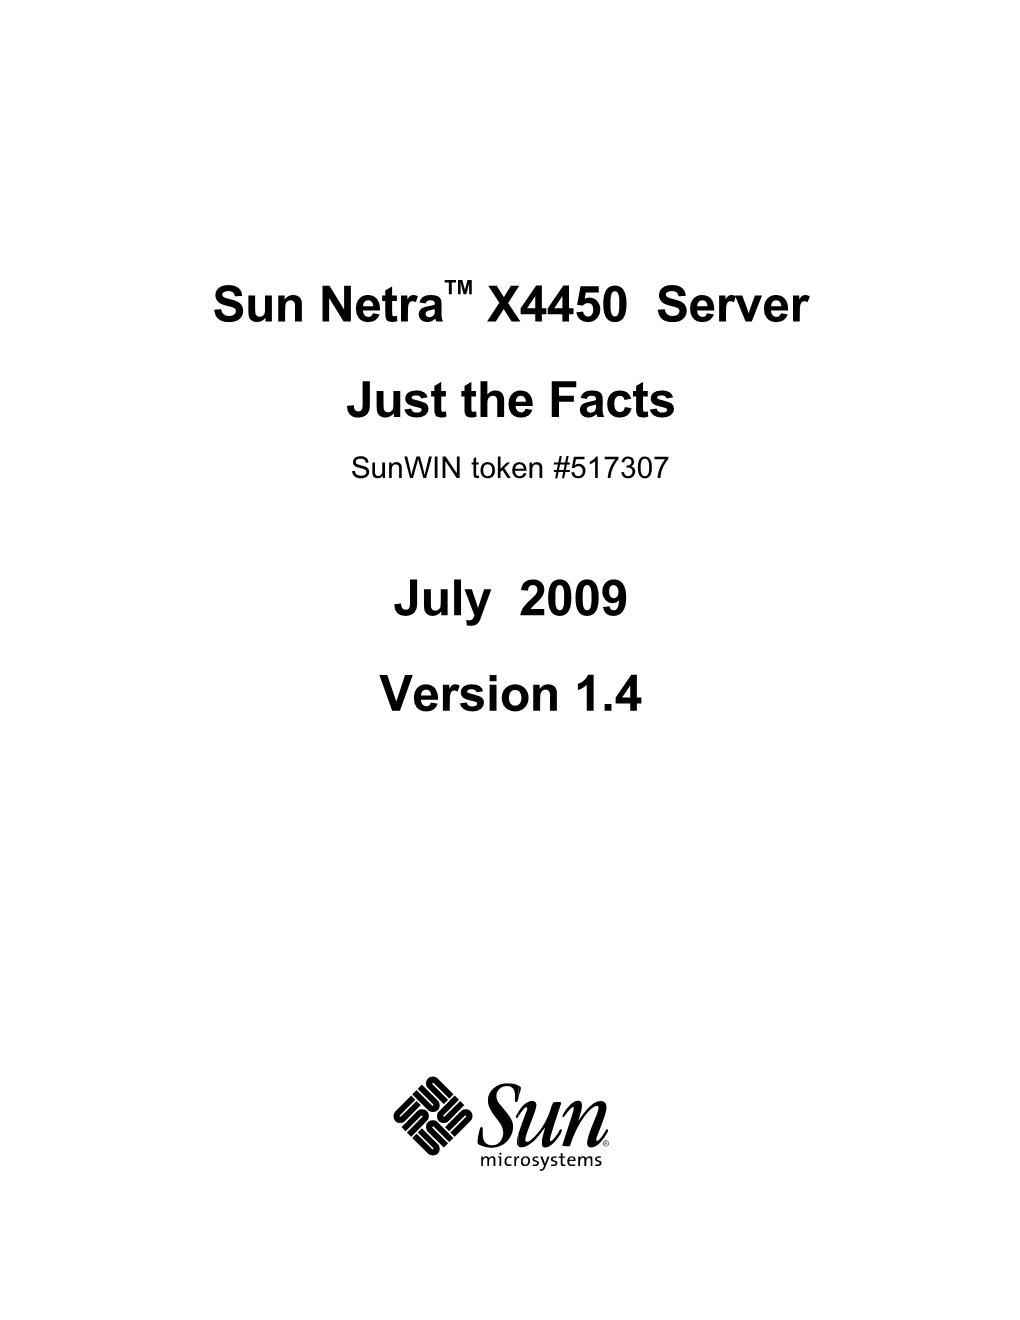 Netra X4200 Server Just the Facts